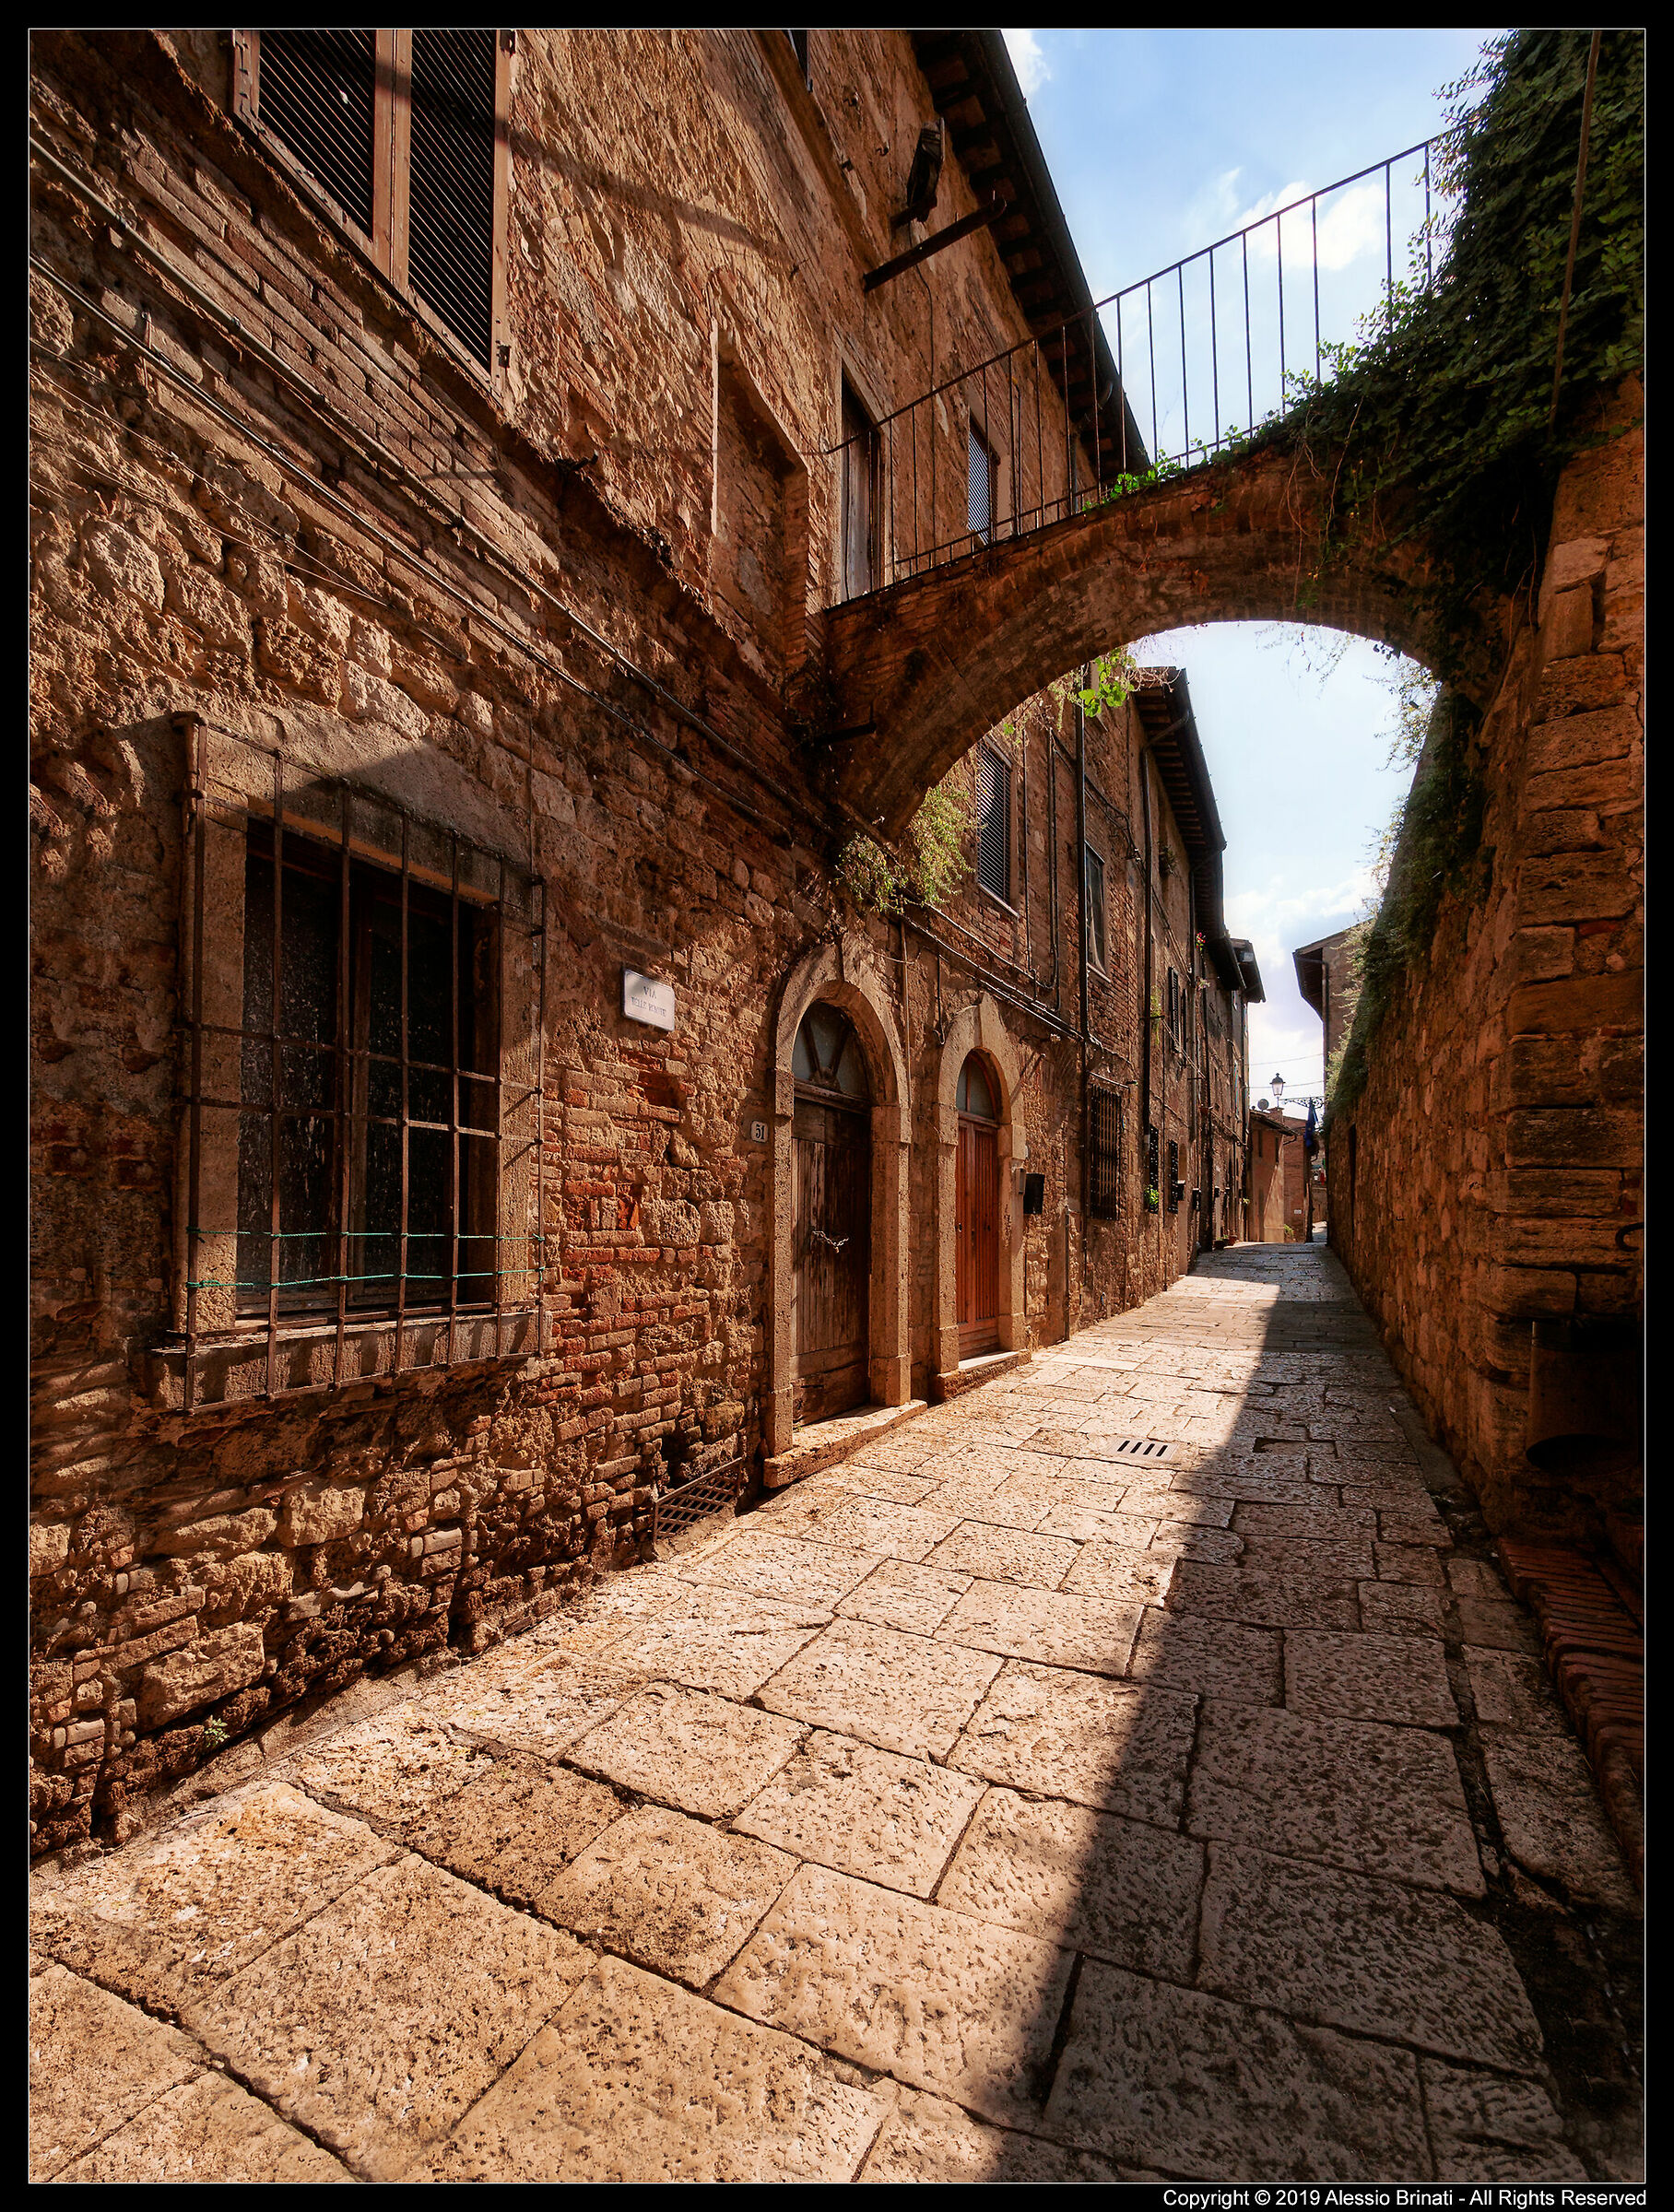 For the alleys of Colle Val d'elsa...